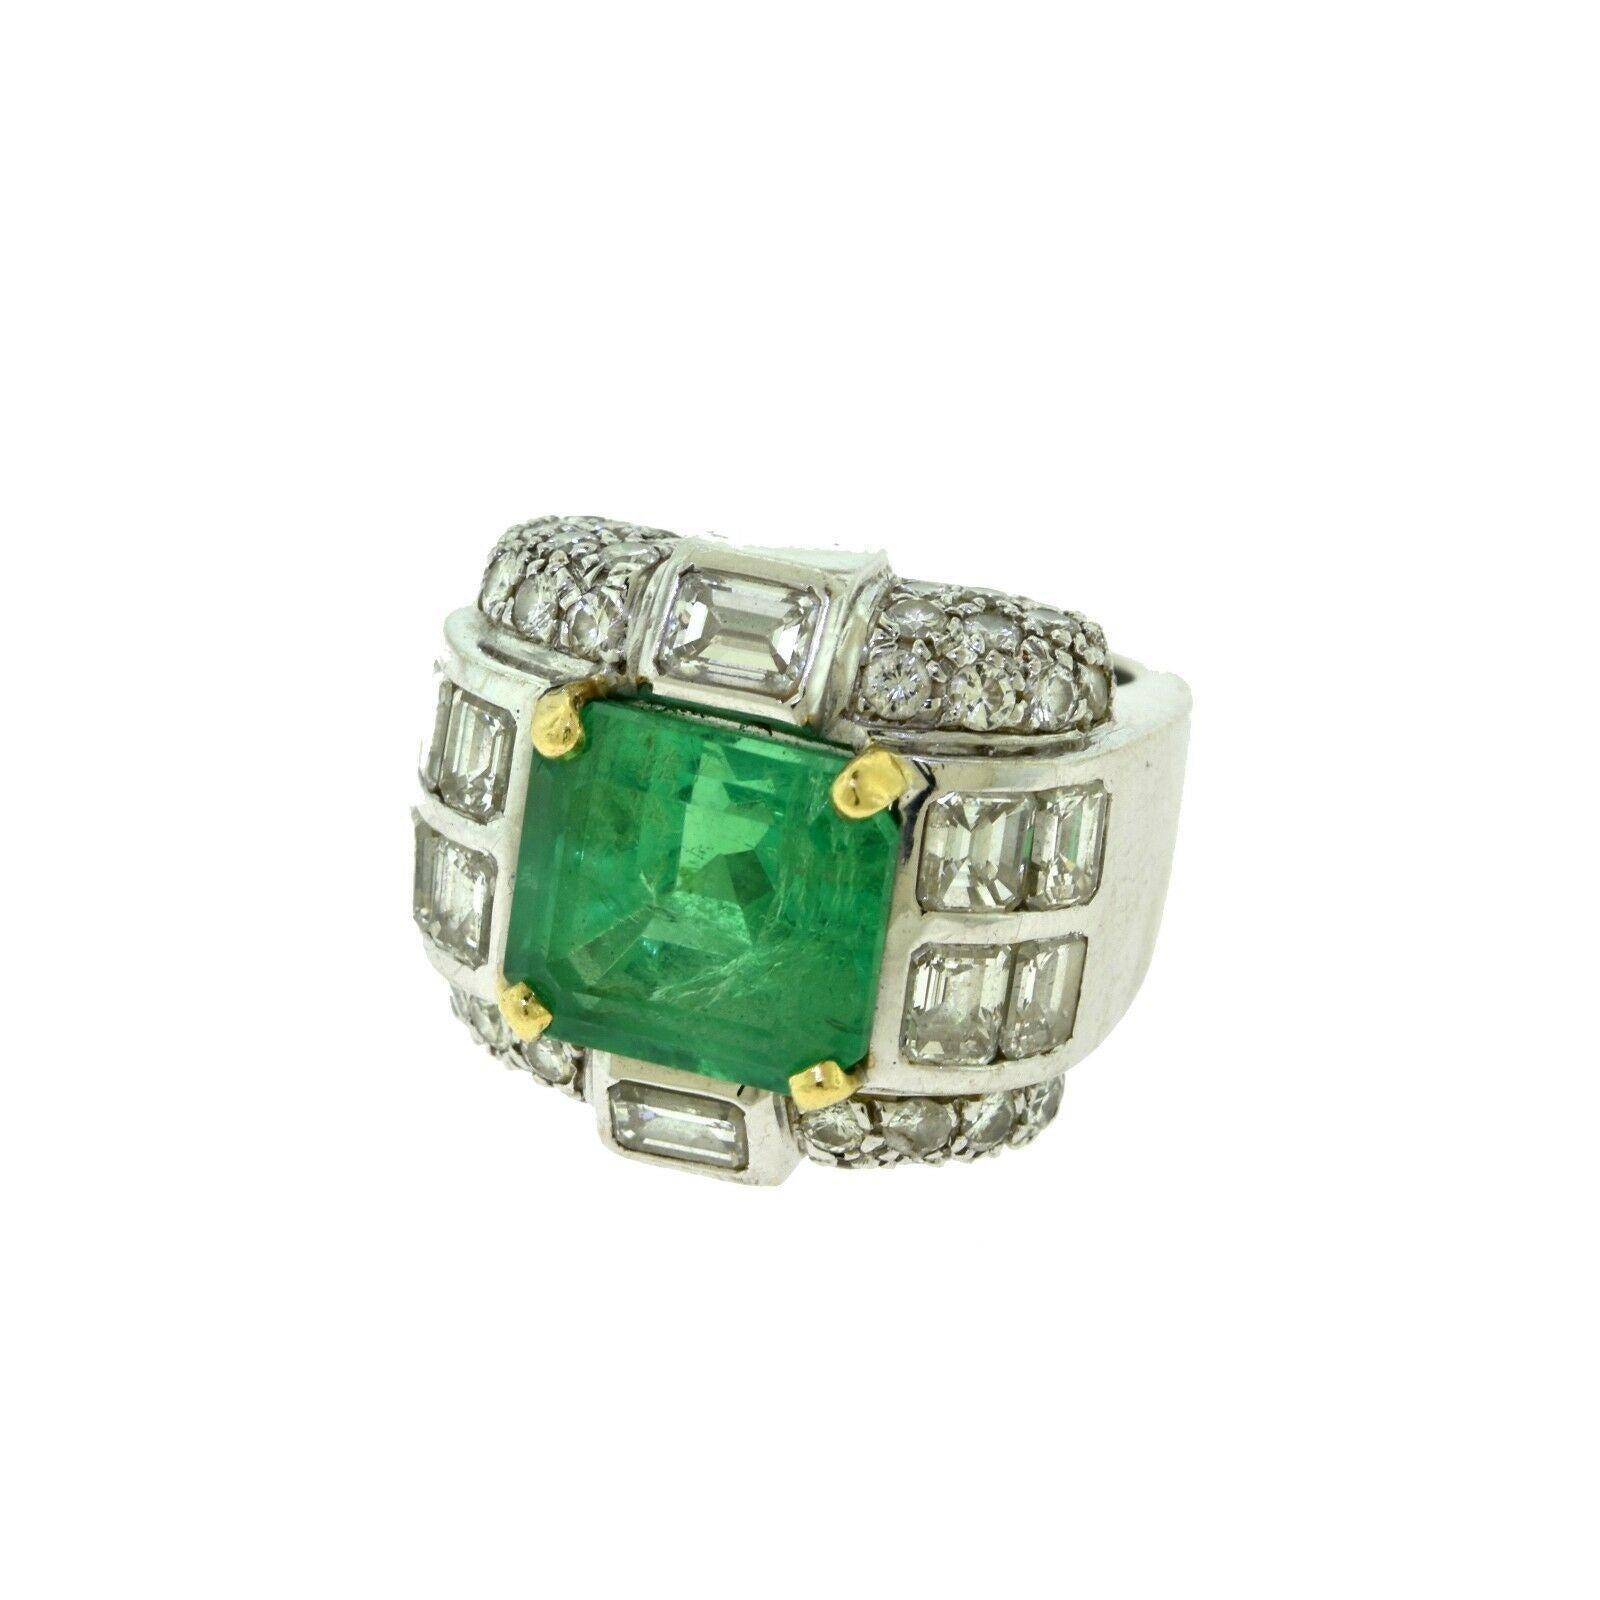 Brilliance Jewels, Miami
Questions? Call Us Anytime!
786,482,8100

Style: Art Deco Style
Metal: 18k White Gold
Stones: 1 Octagonal Natural Beryl Emerald, Round and Baguette
Emerald Weight: 8.45 ct
Emerald Dimensions: 11.84 x 10.64 x 9.25 mm
Diamond